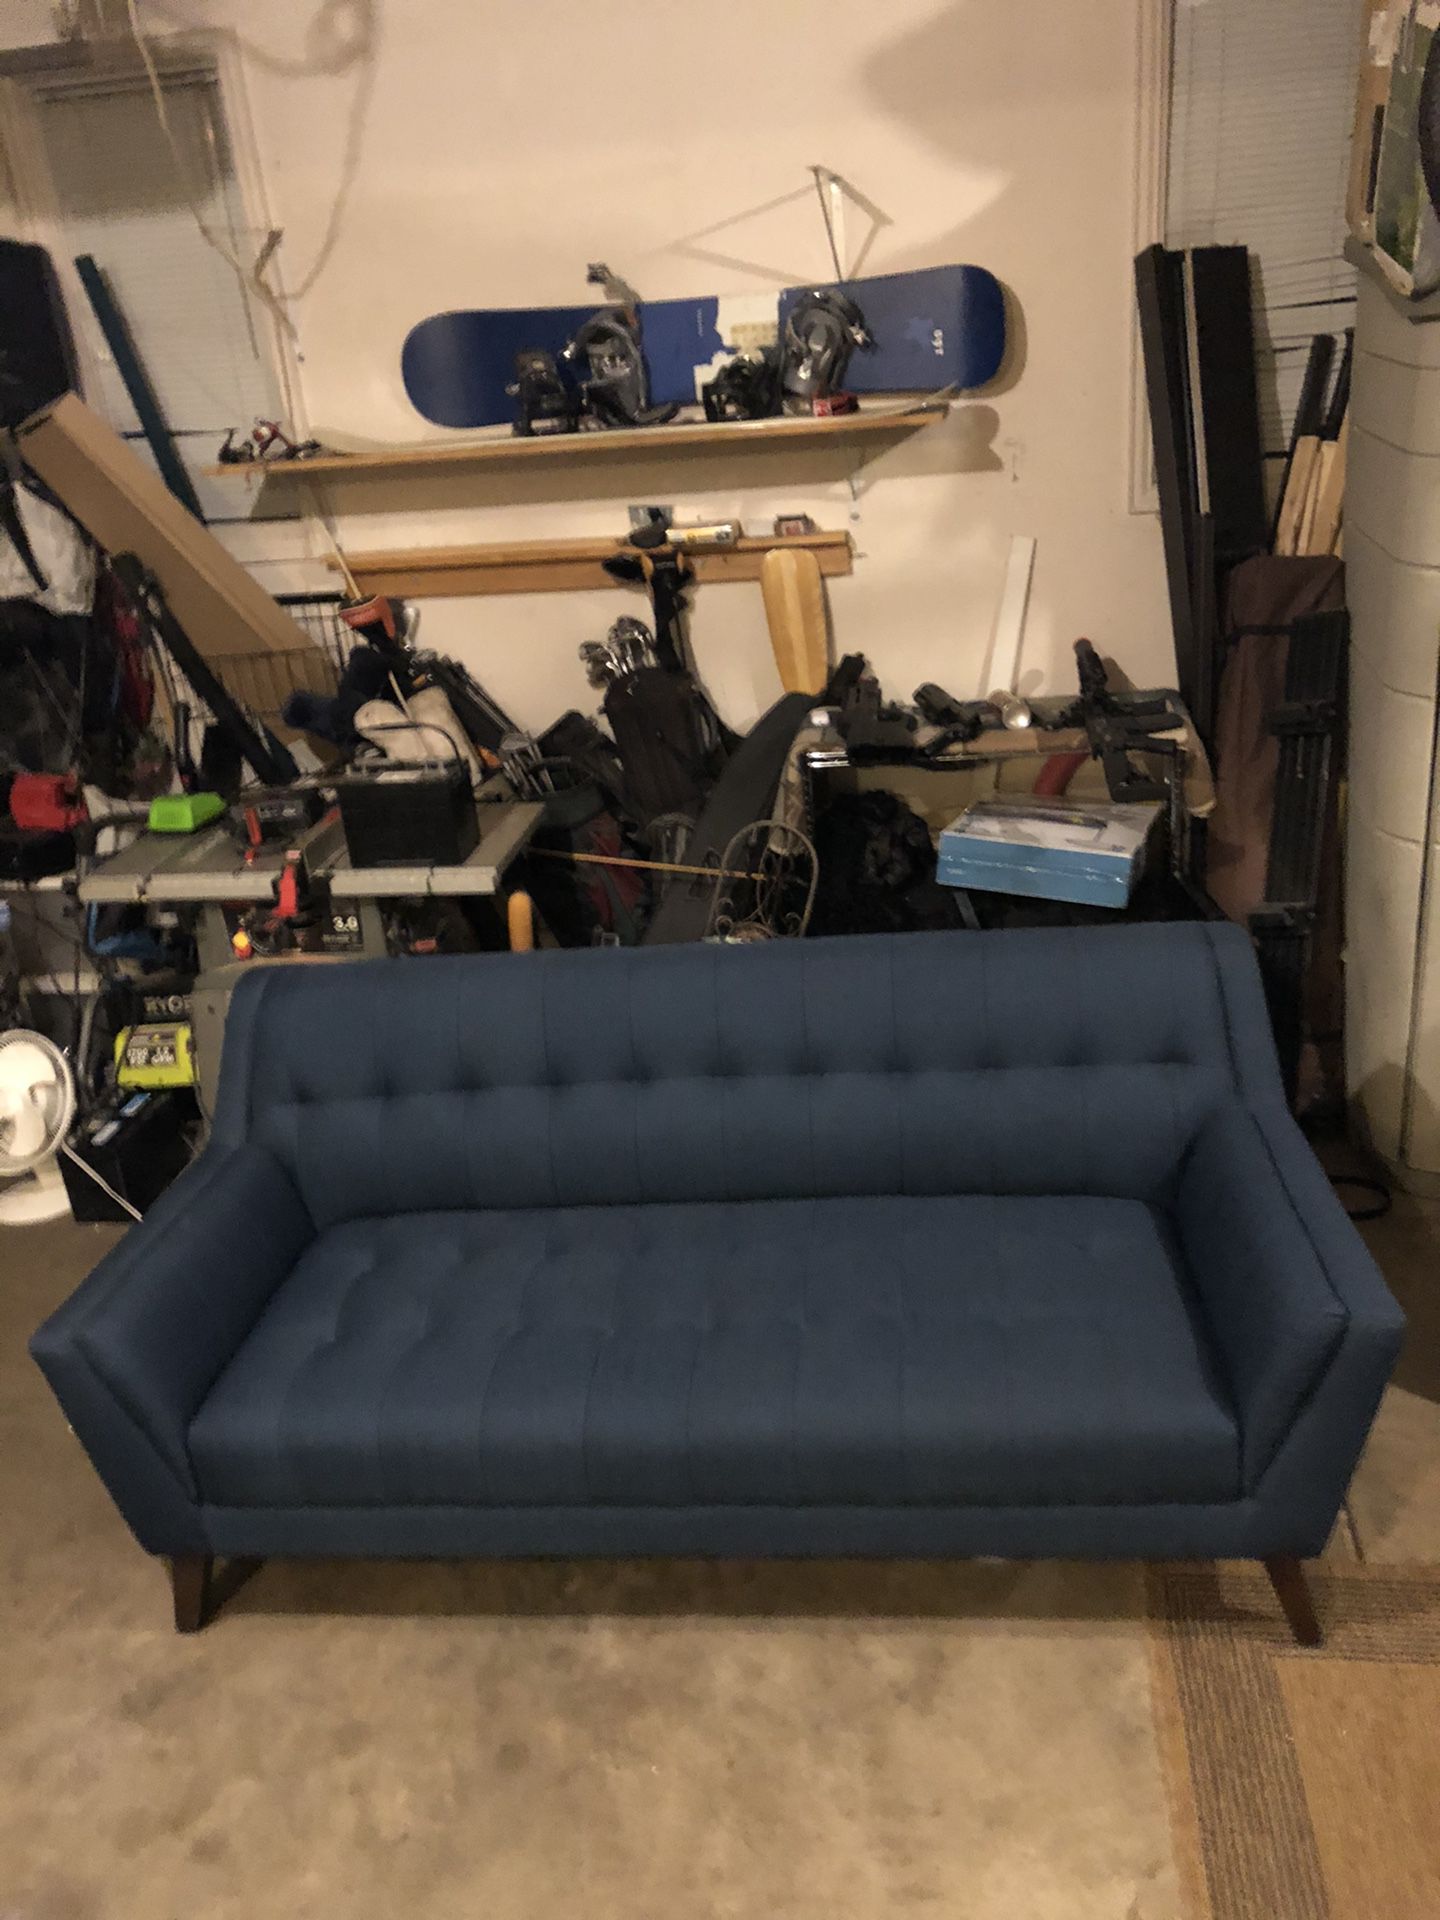 Blue Couch/Futon For Sale- 32 1/2 inches wide and 74 1/2 inches long